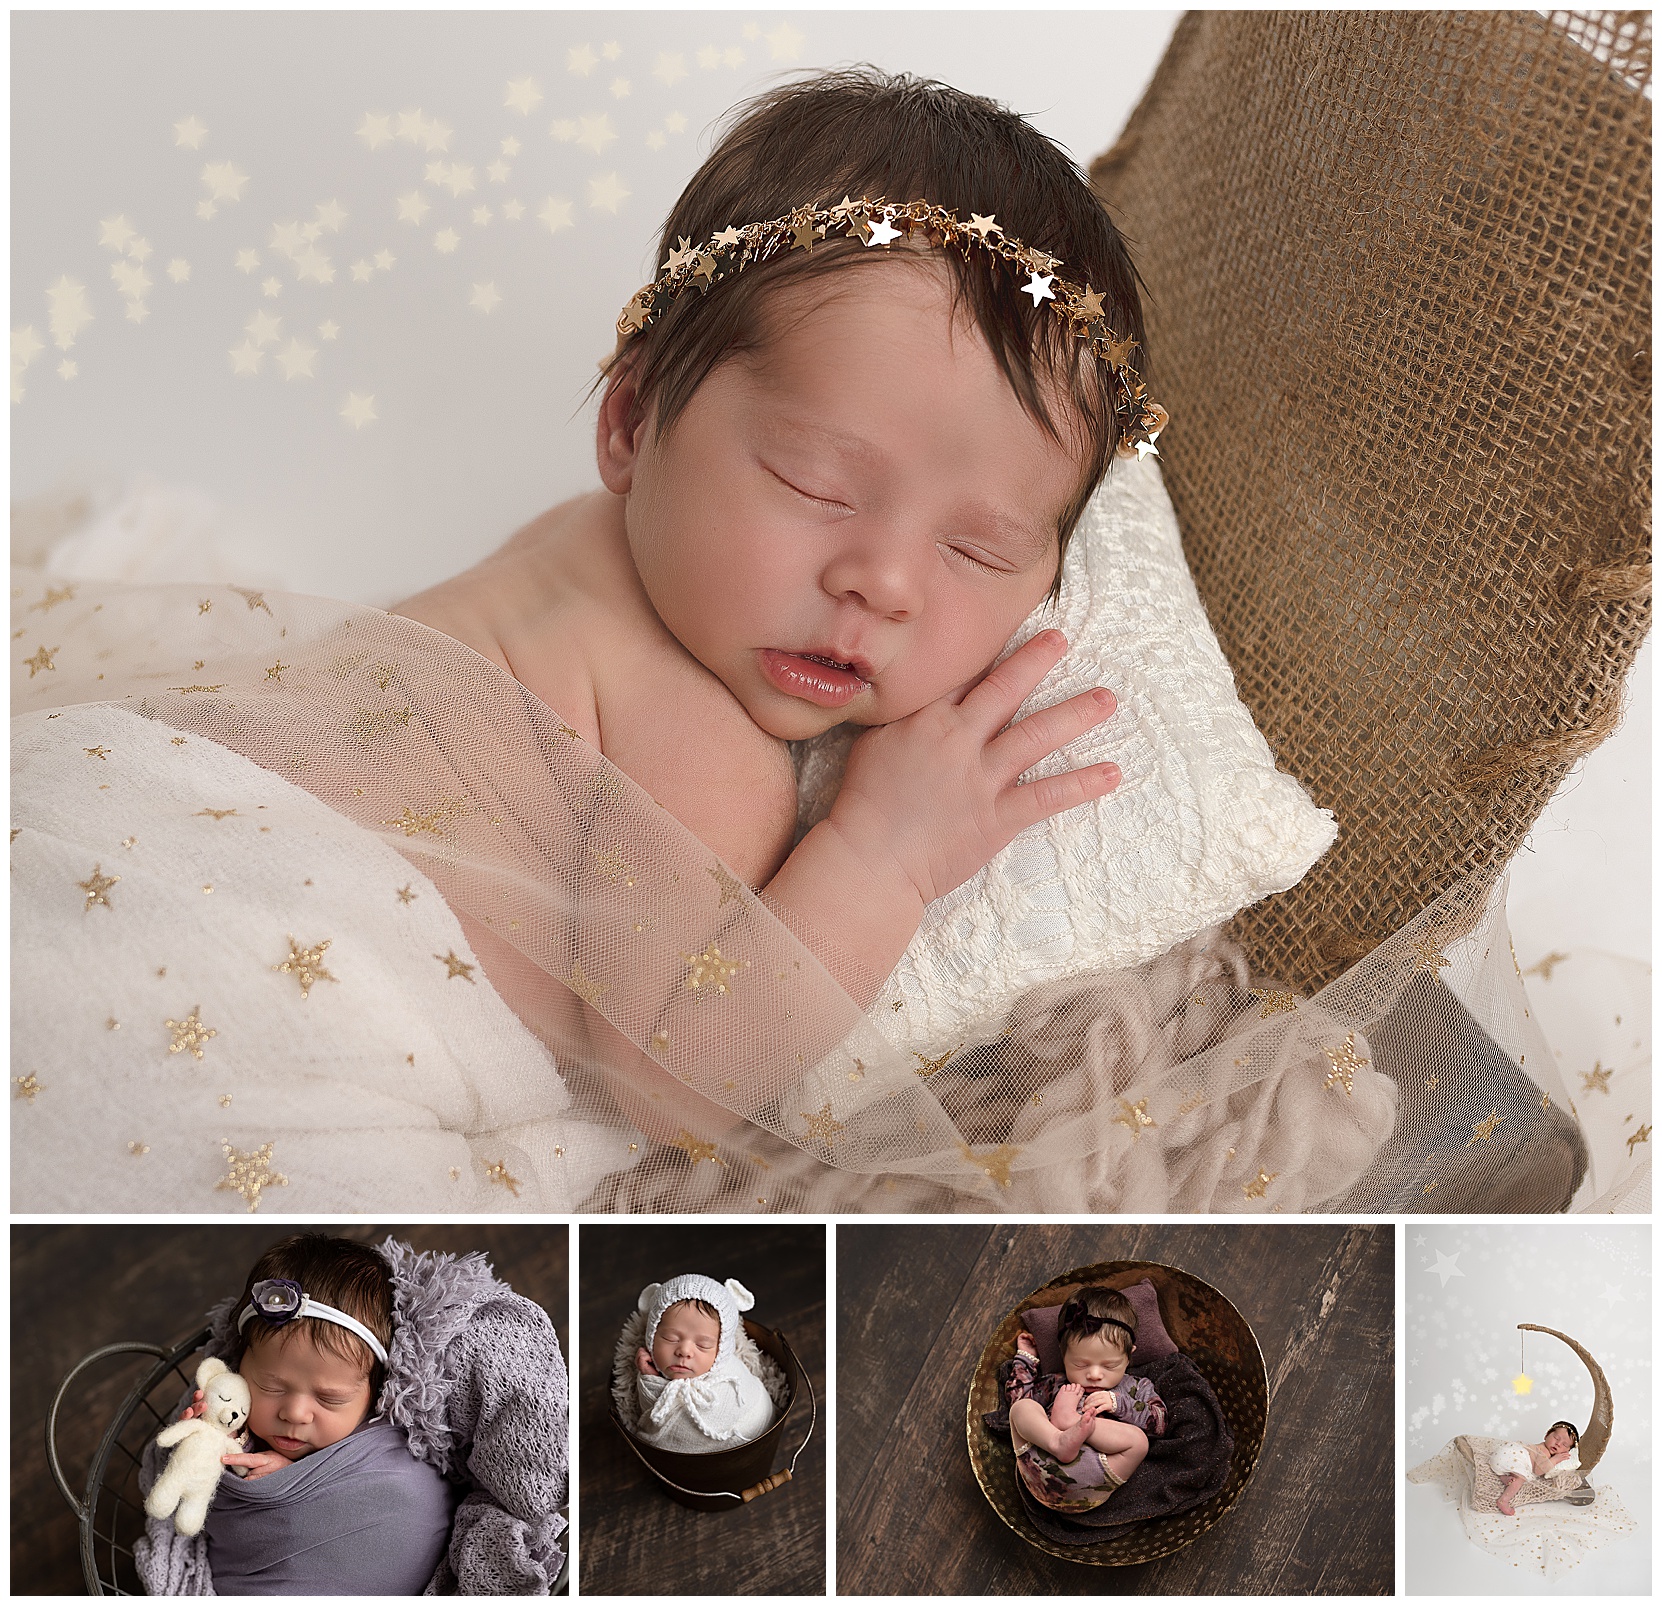 collage of a sleeping baby during her newborn photoshoot